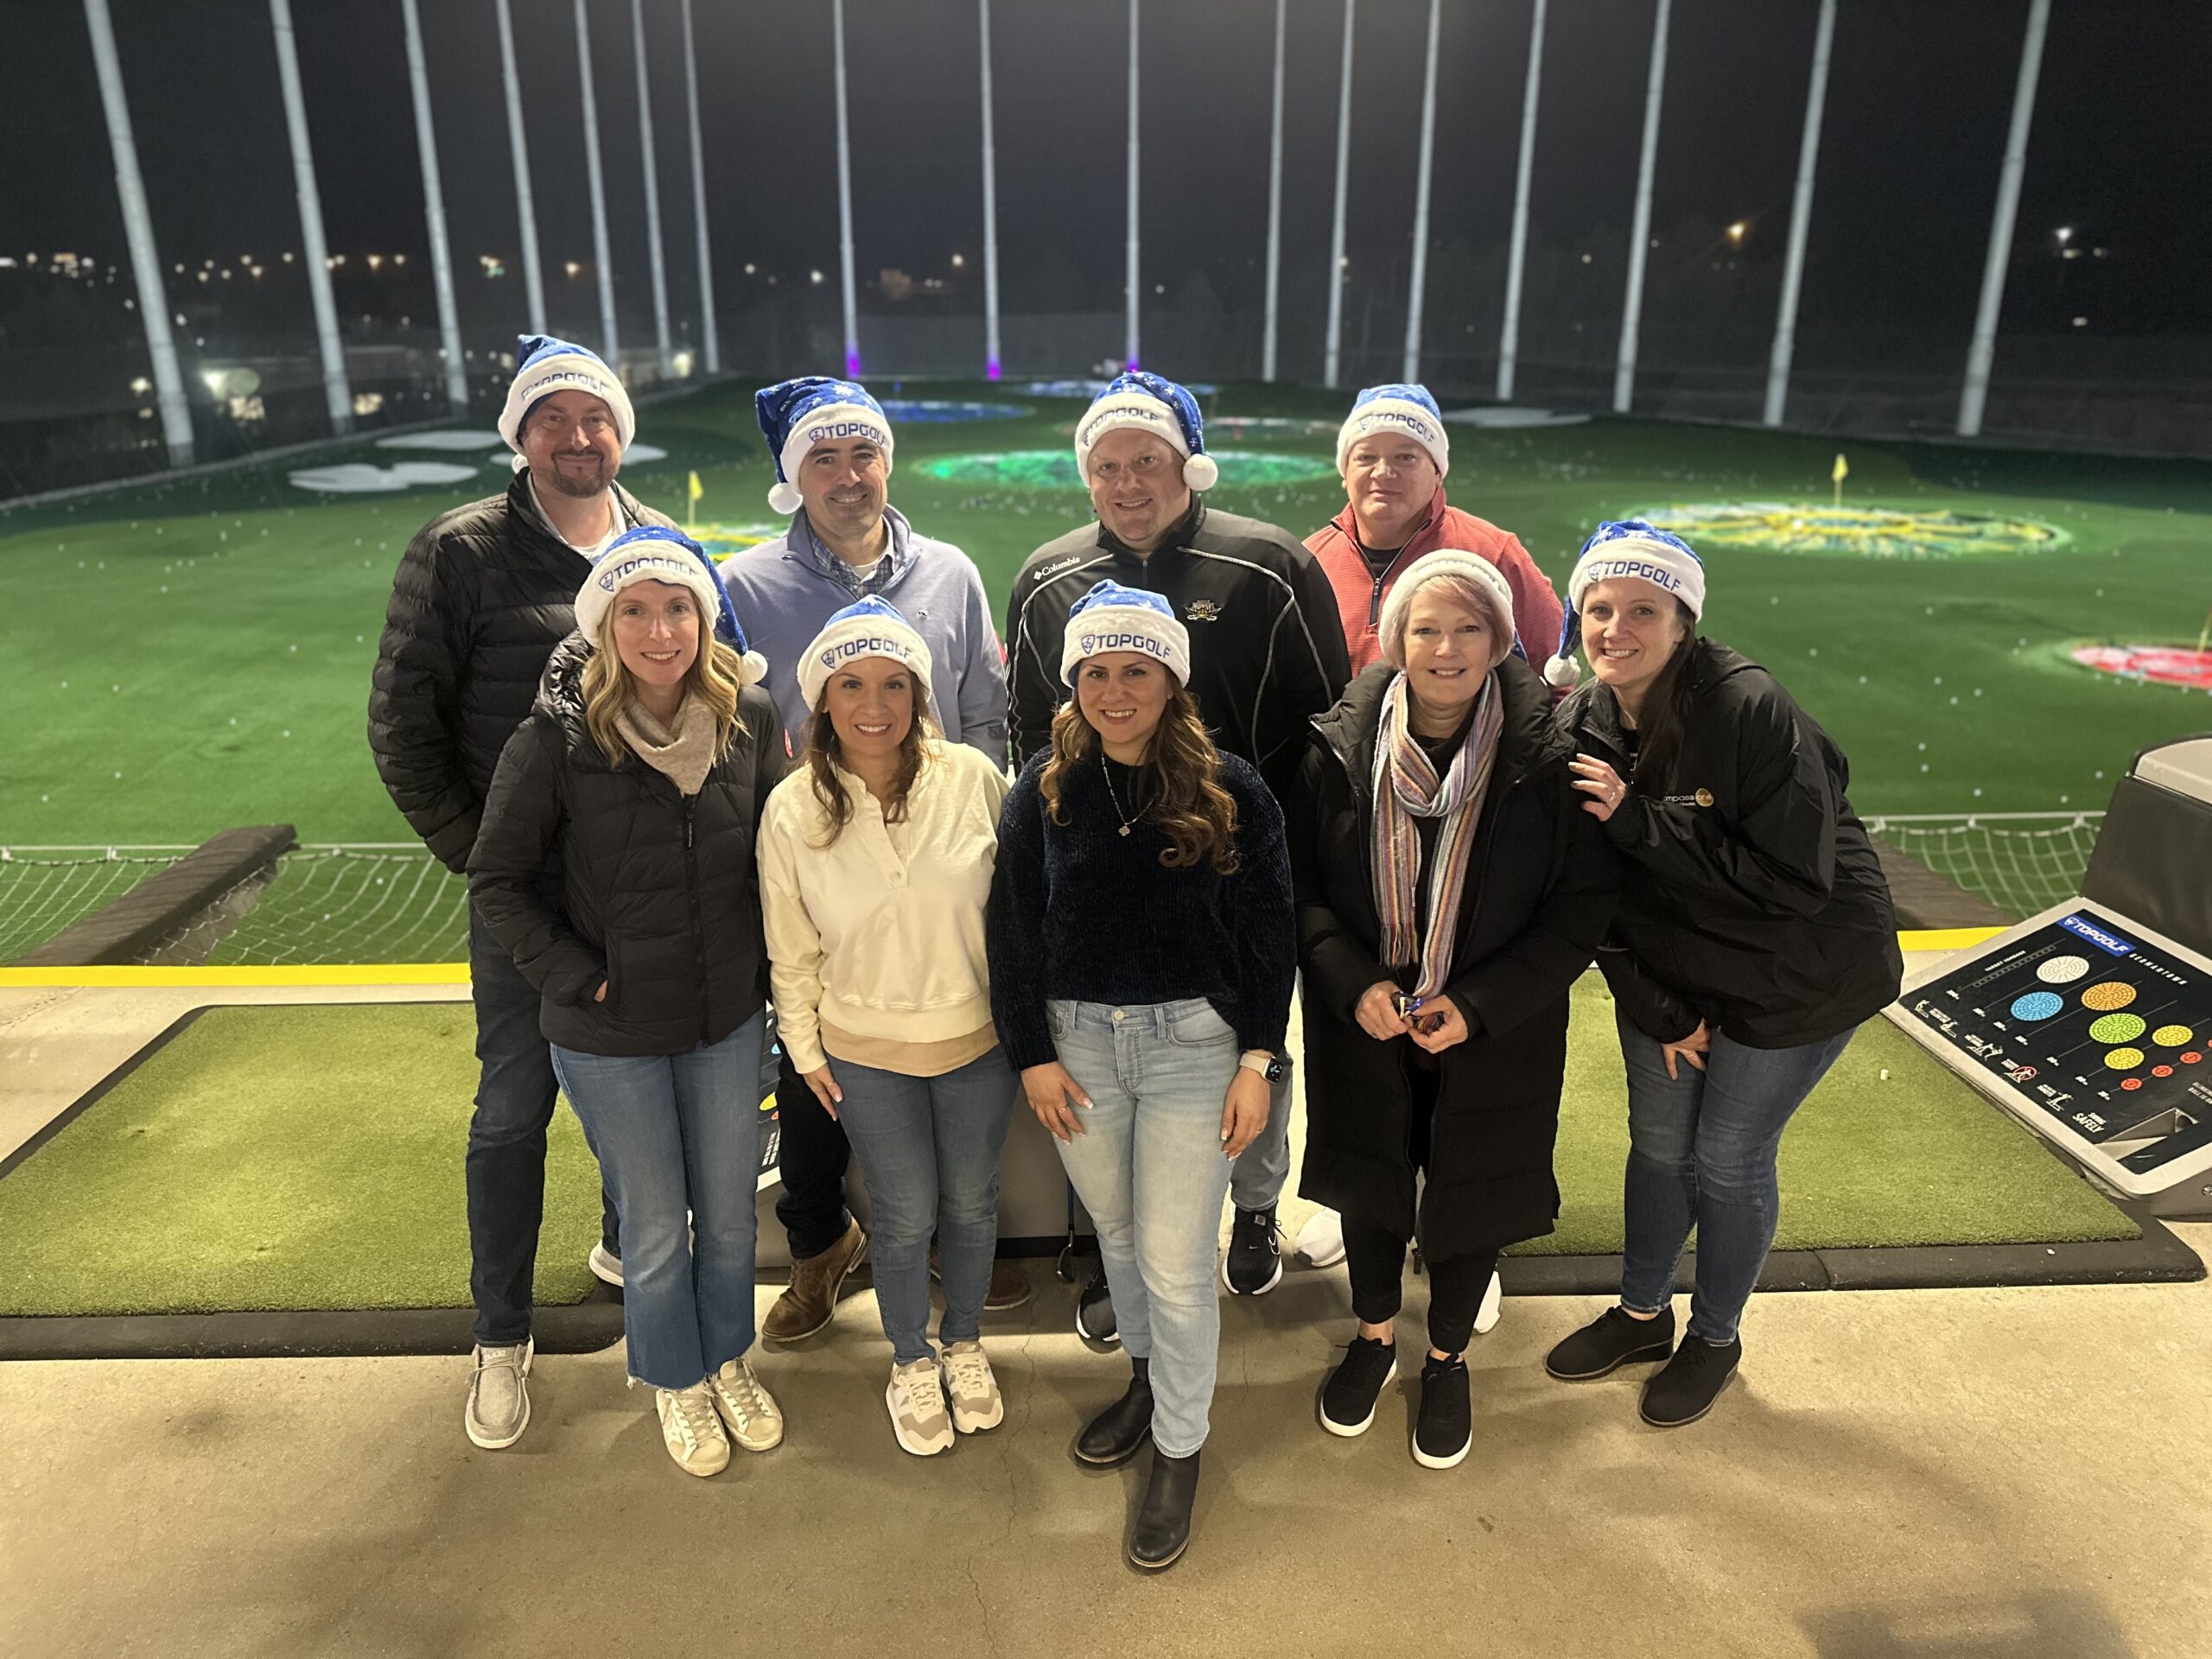 Melissa Grimes with her team members at Top Golf.